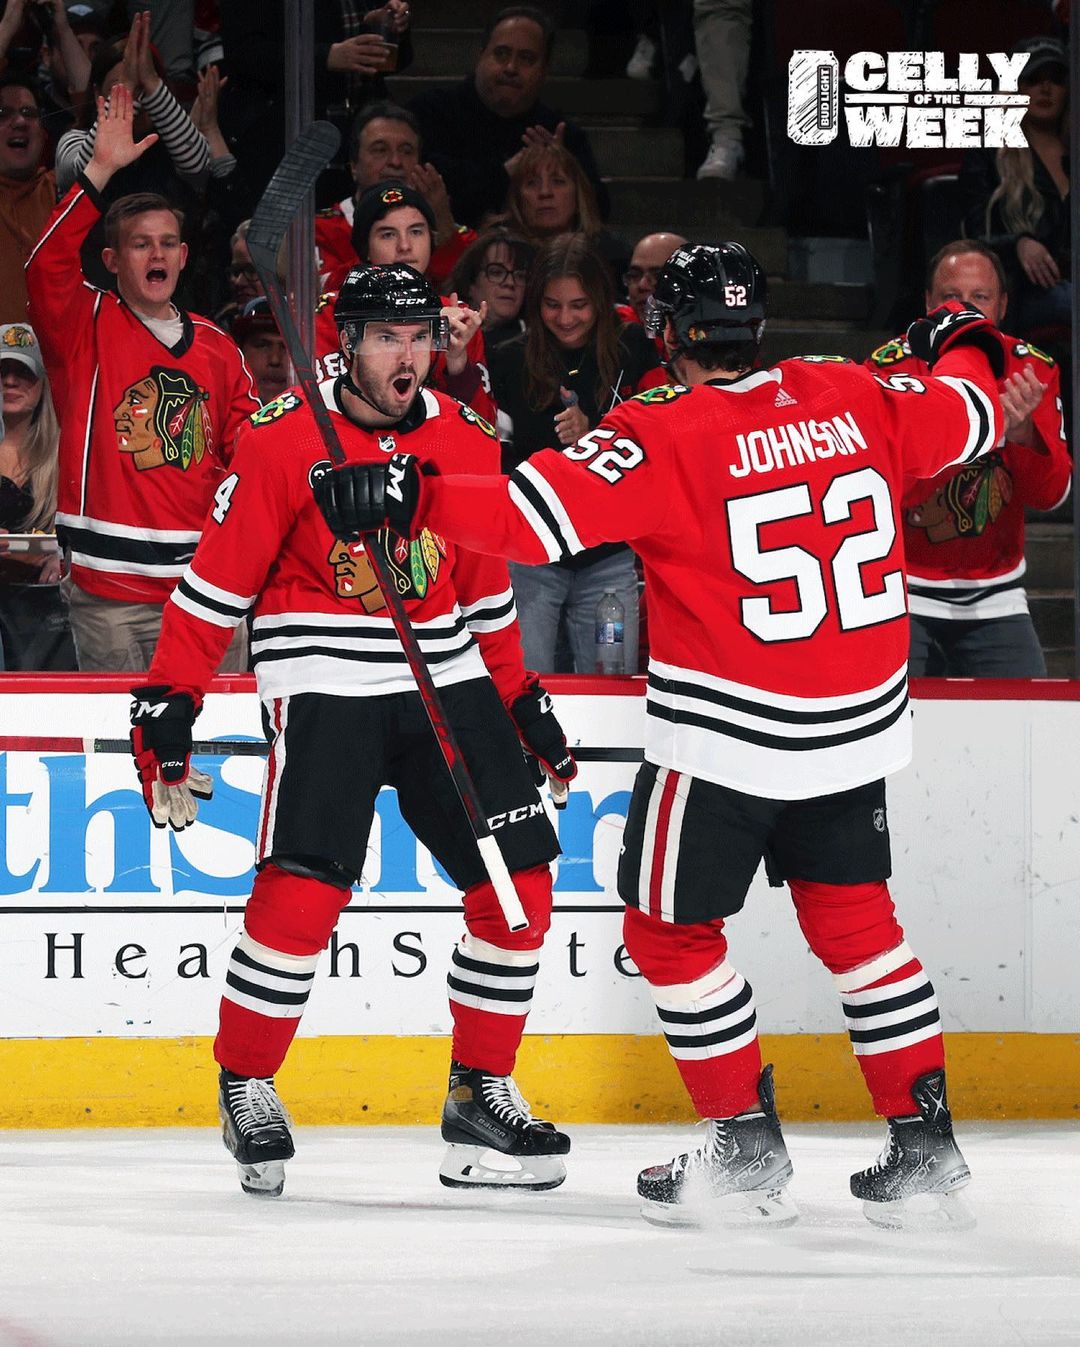 First goal as a Blackhawk for @bkatchouk  #BudLightCelly...